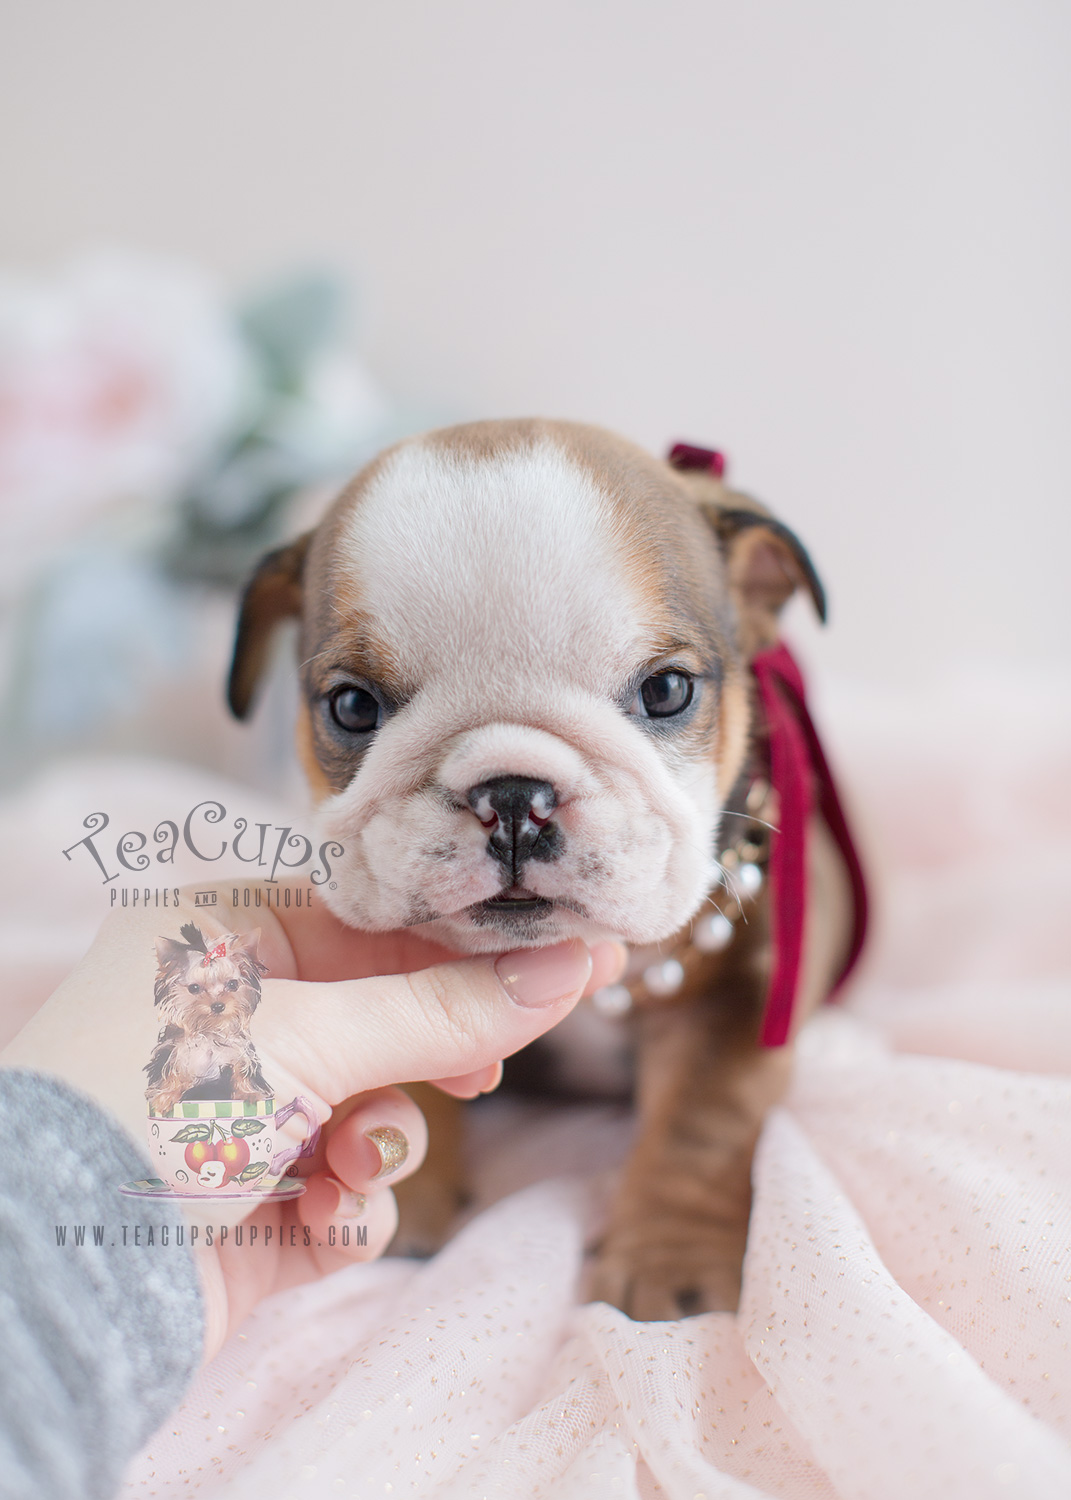 Adorable English Bulldog Puppies for Sale Teacup Puppies